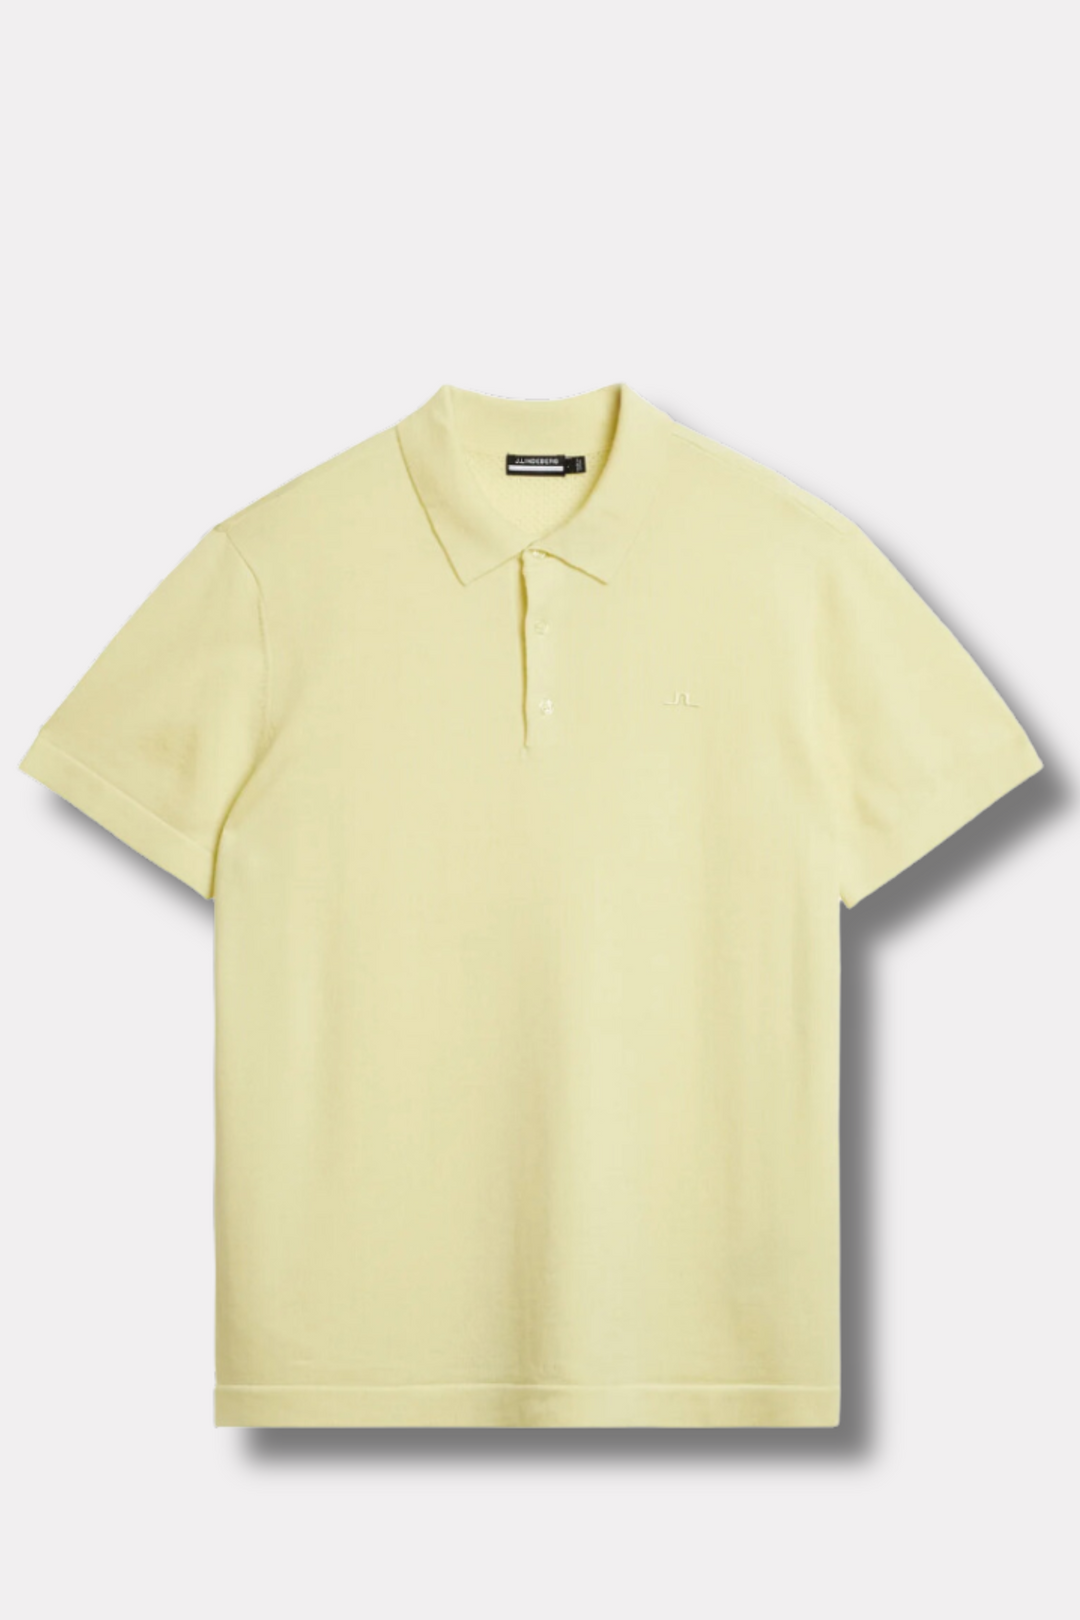 Lear Knitted Shirt Wax Yellow